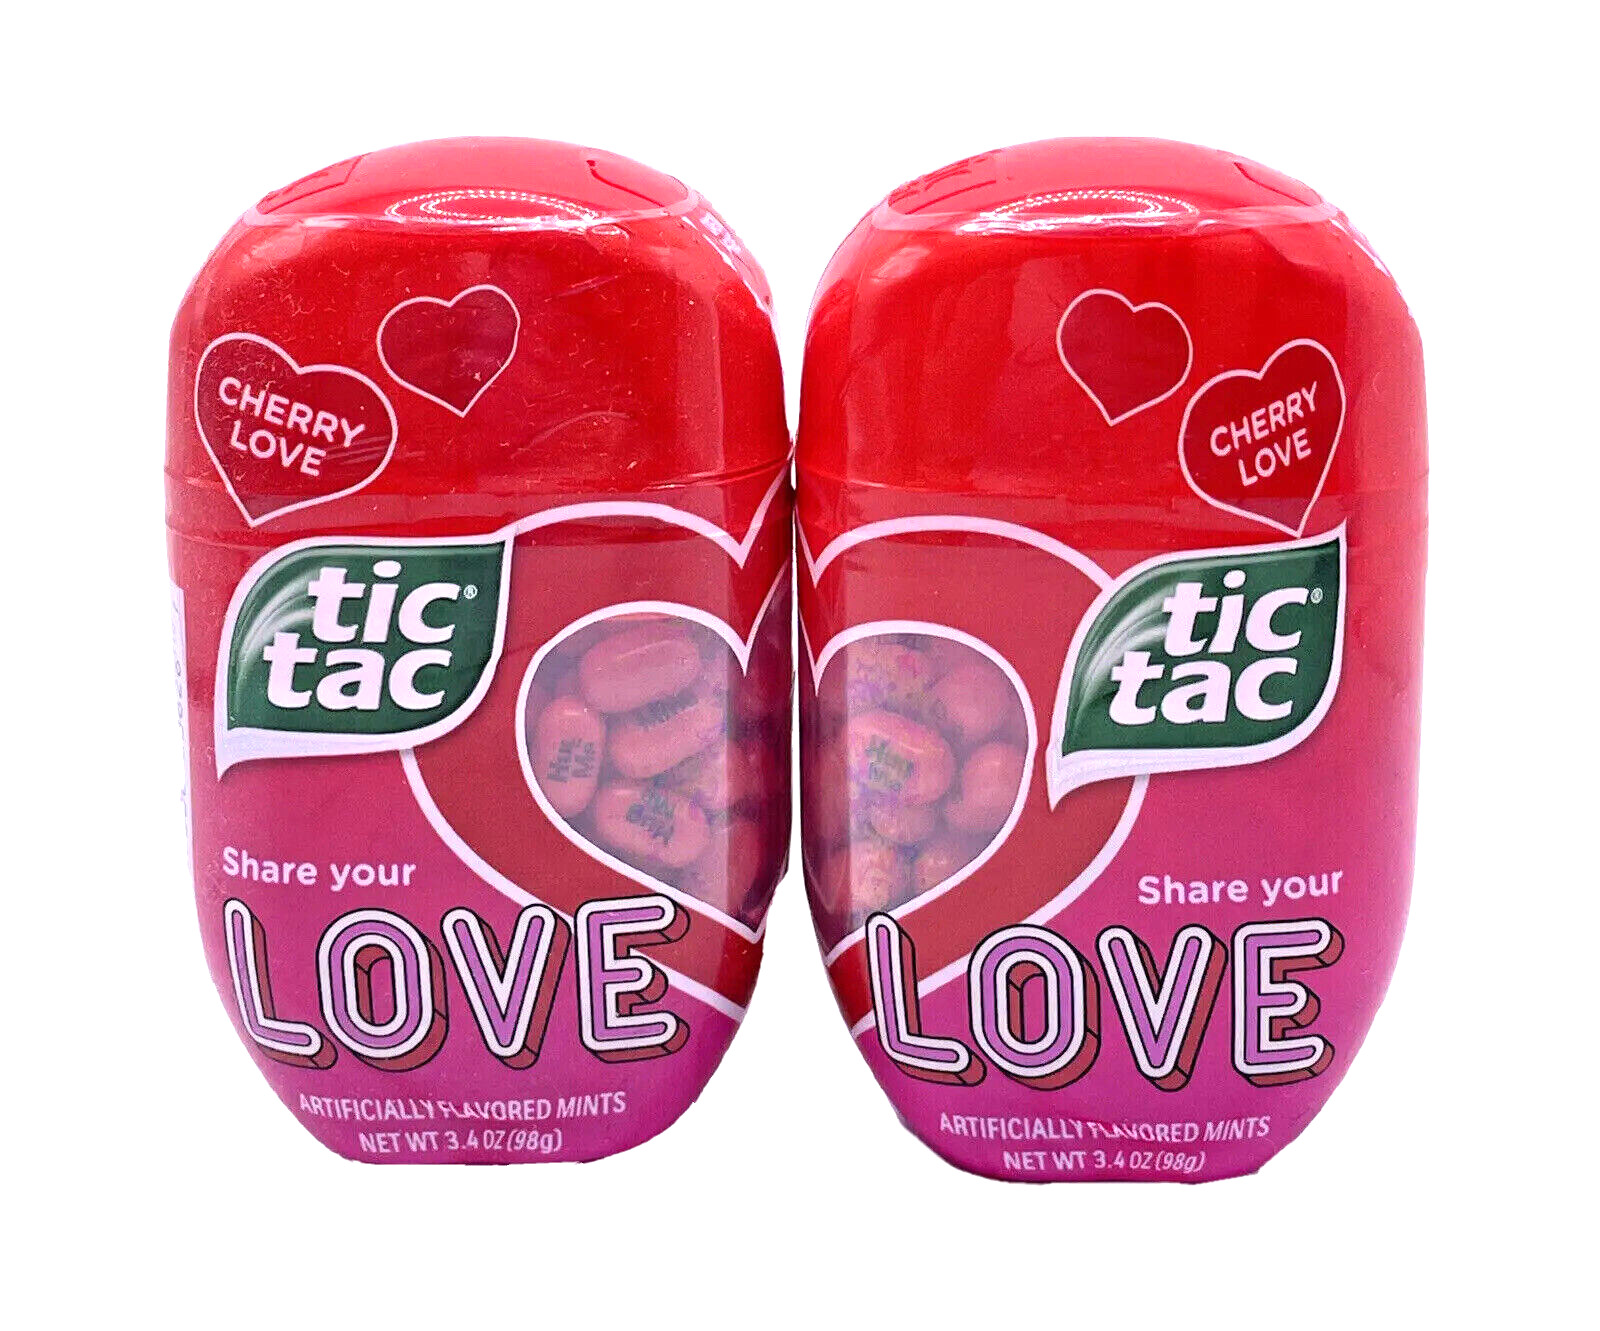 RARE Ltd Ed. Share your Love Pair TIC TAC CHERRY LOVE Flavor Printed Candy Mints